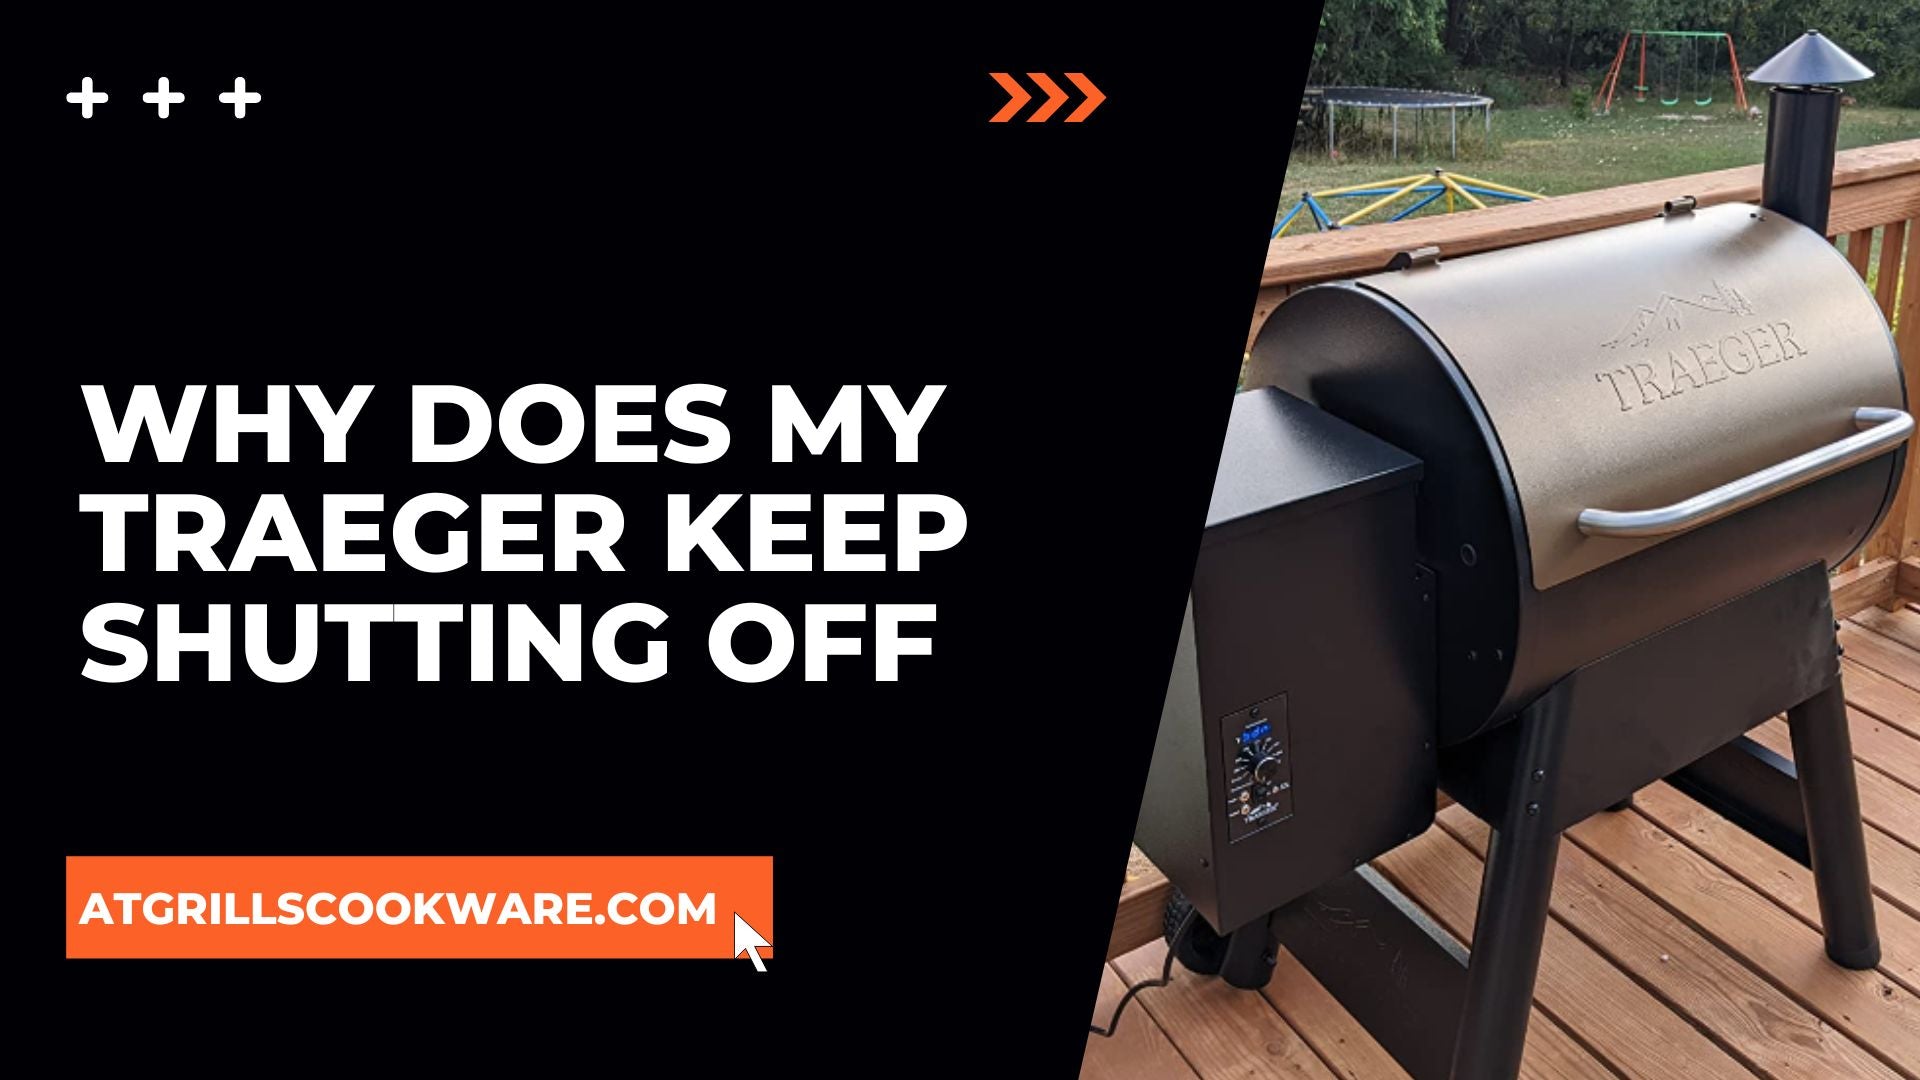 Why Does My Traeger Keep Shutting Off